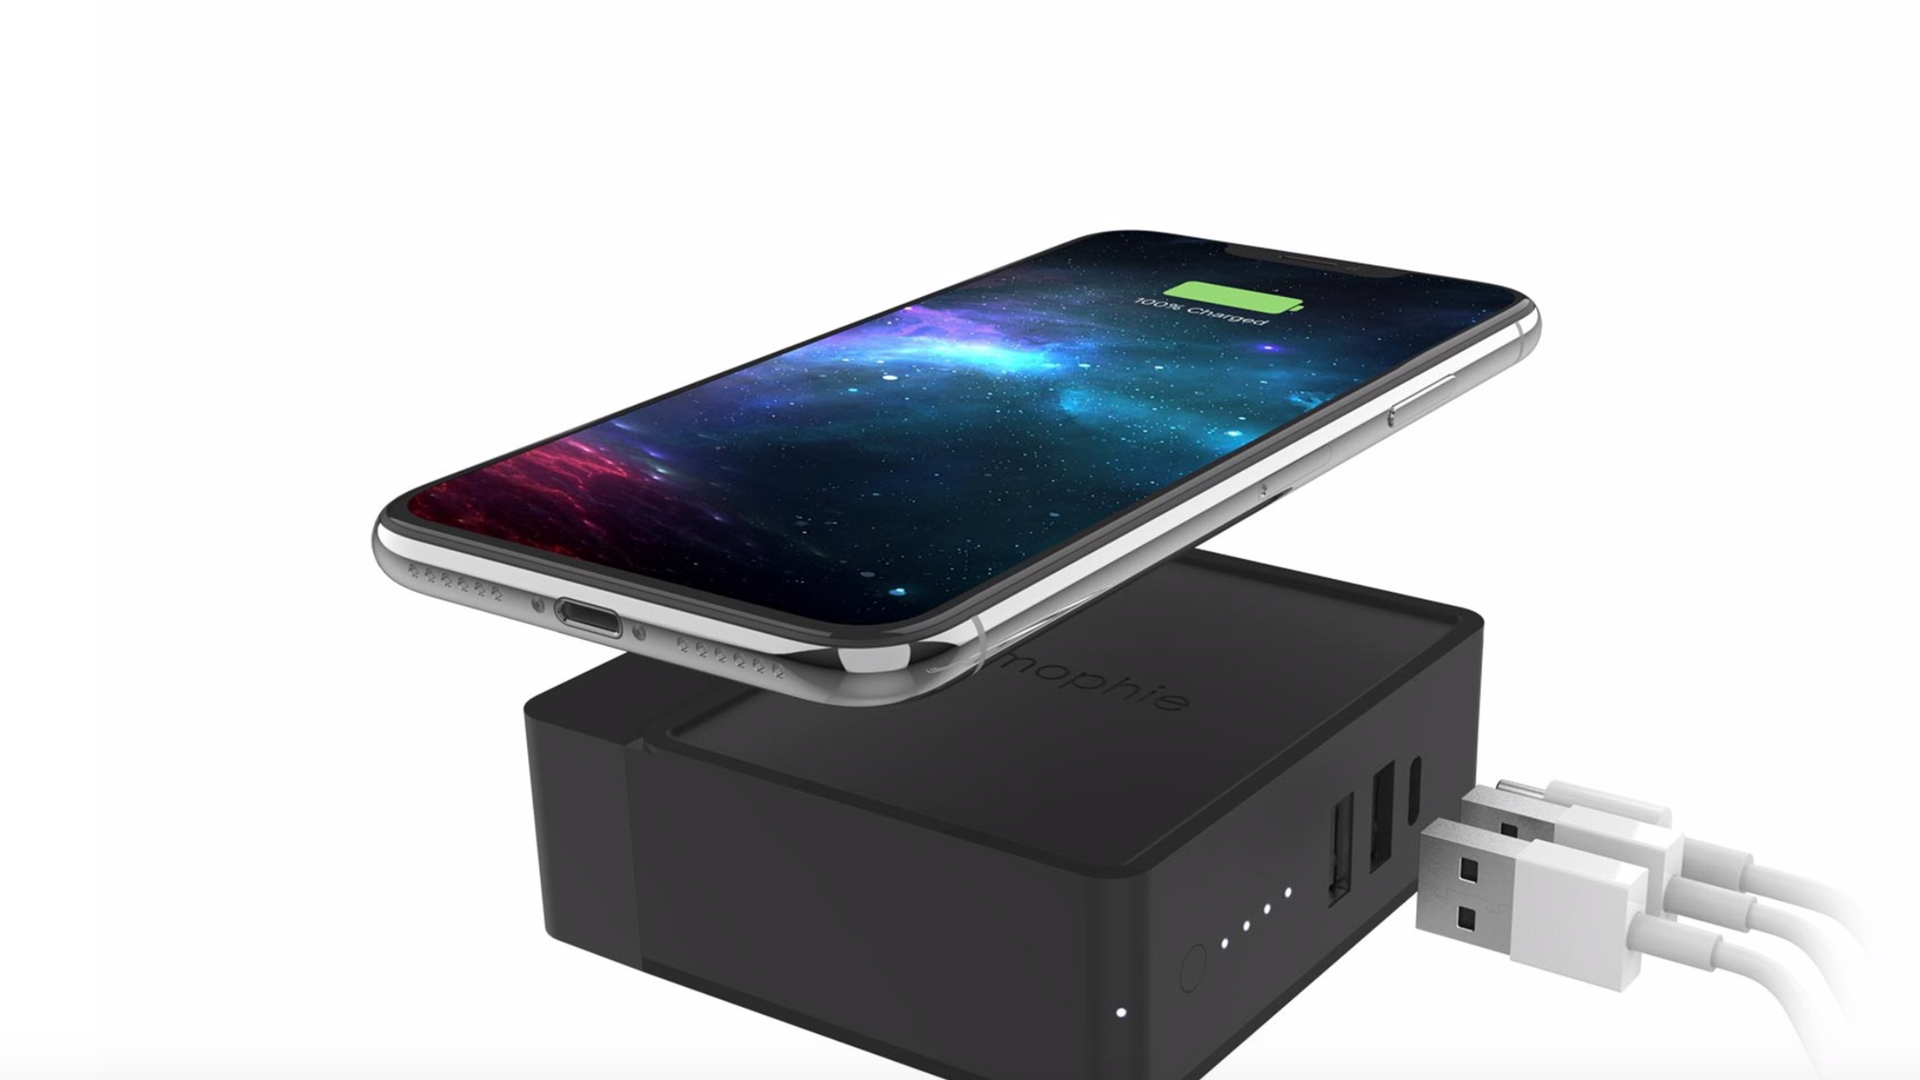 Mophie's Powerstation Hub combines a versatile wall charger, portable battery and wireless charging pad in one.